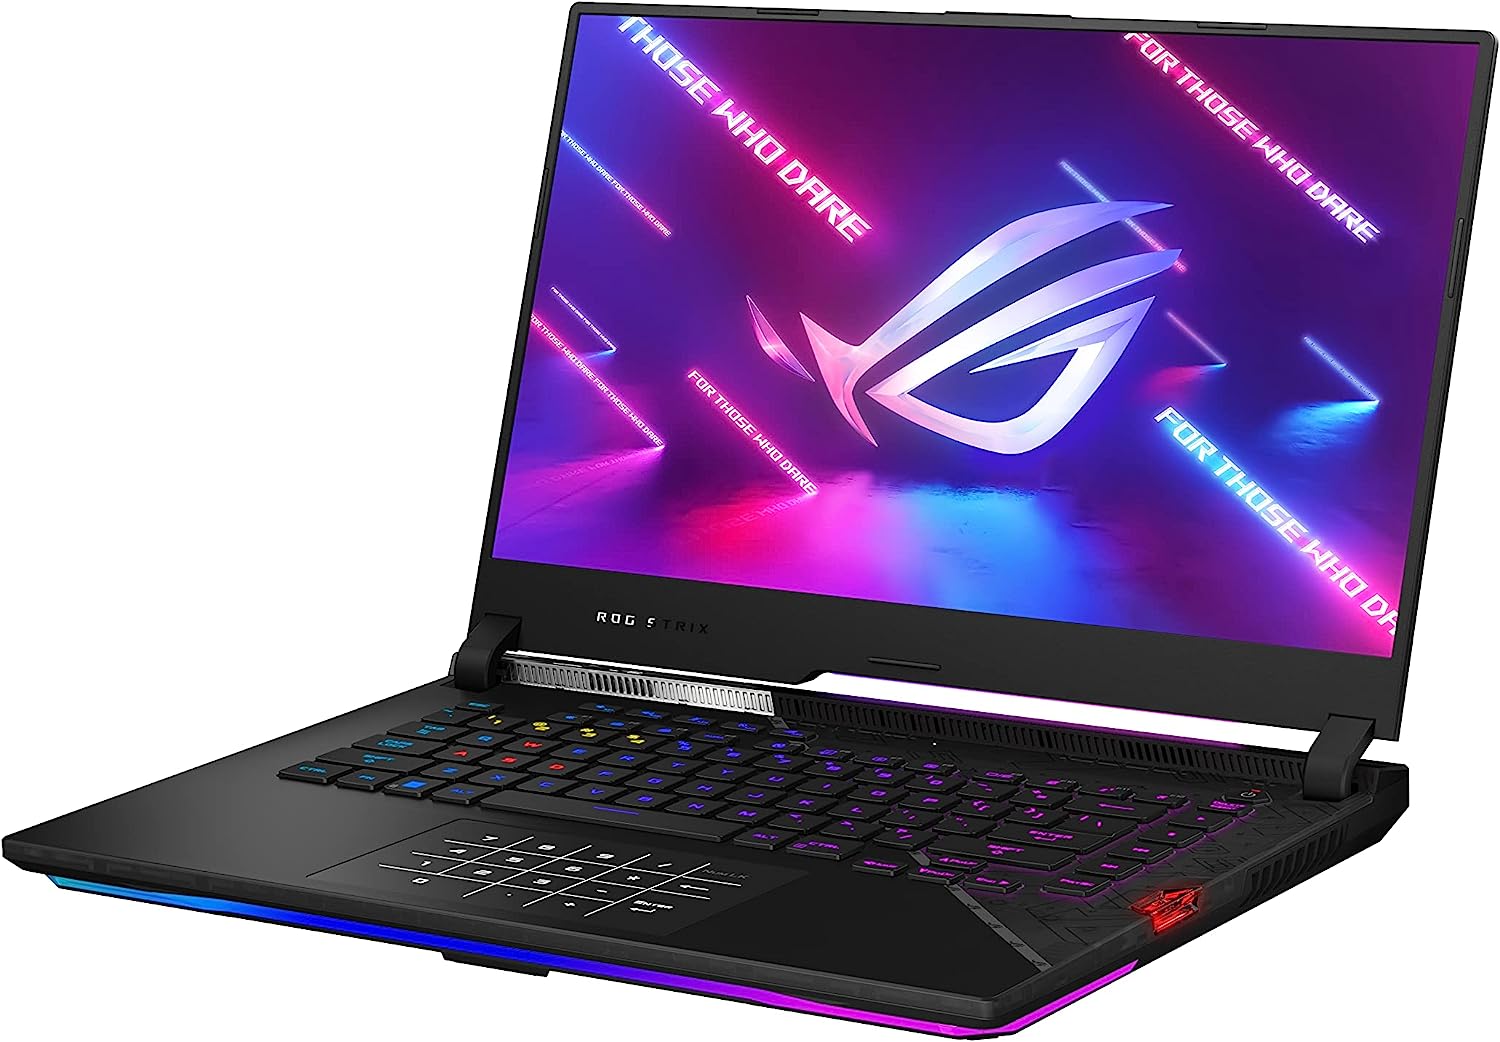 Save $600 on this blistering RTX-powered Asus ROG gaming laptop